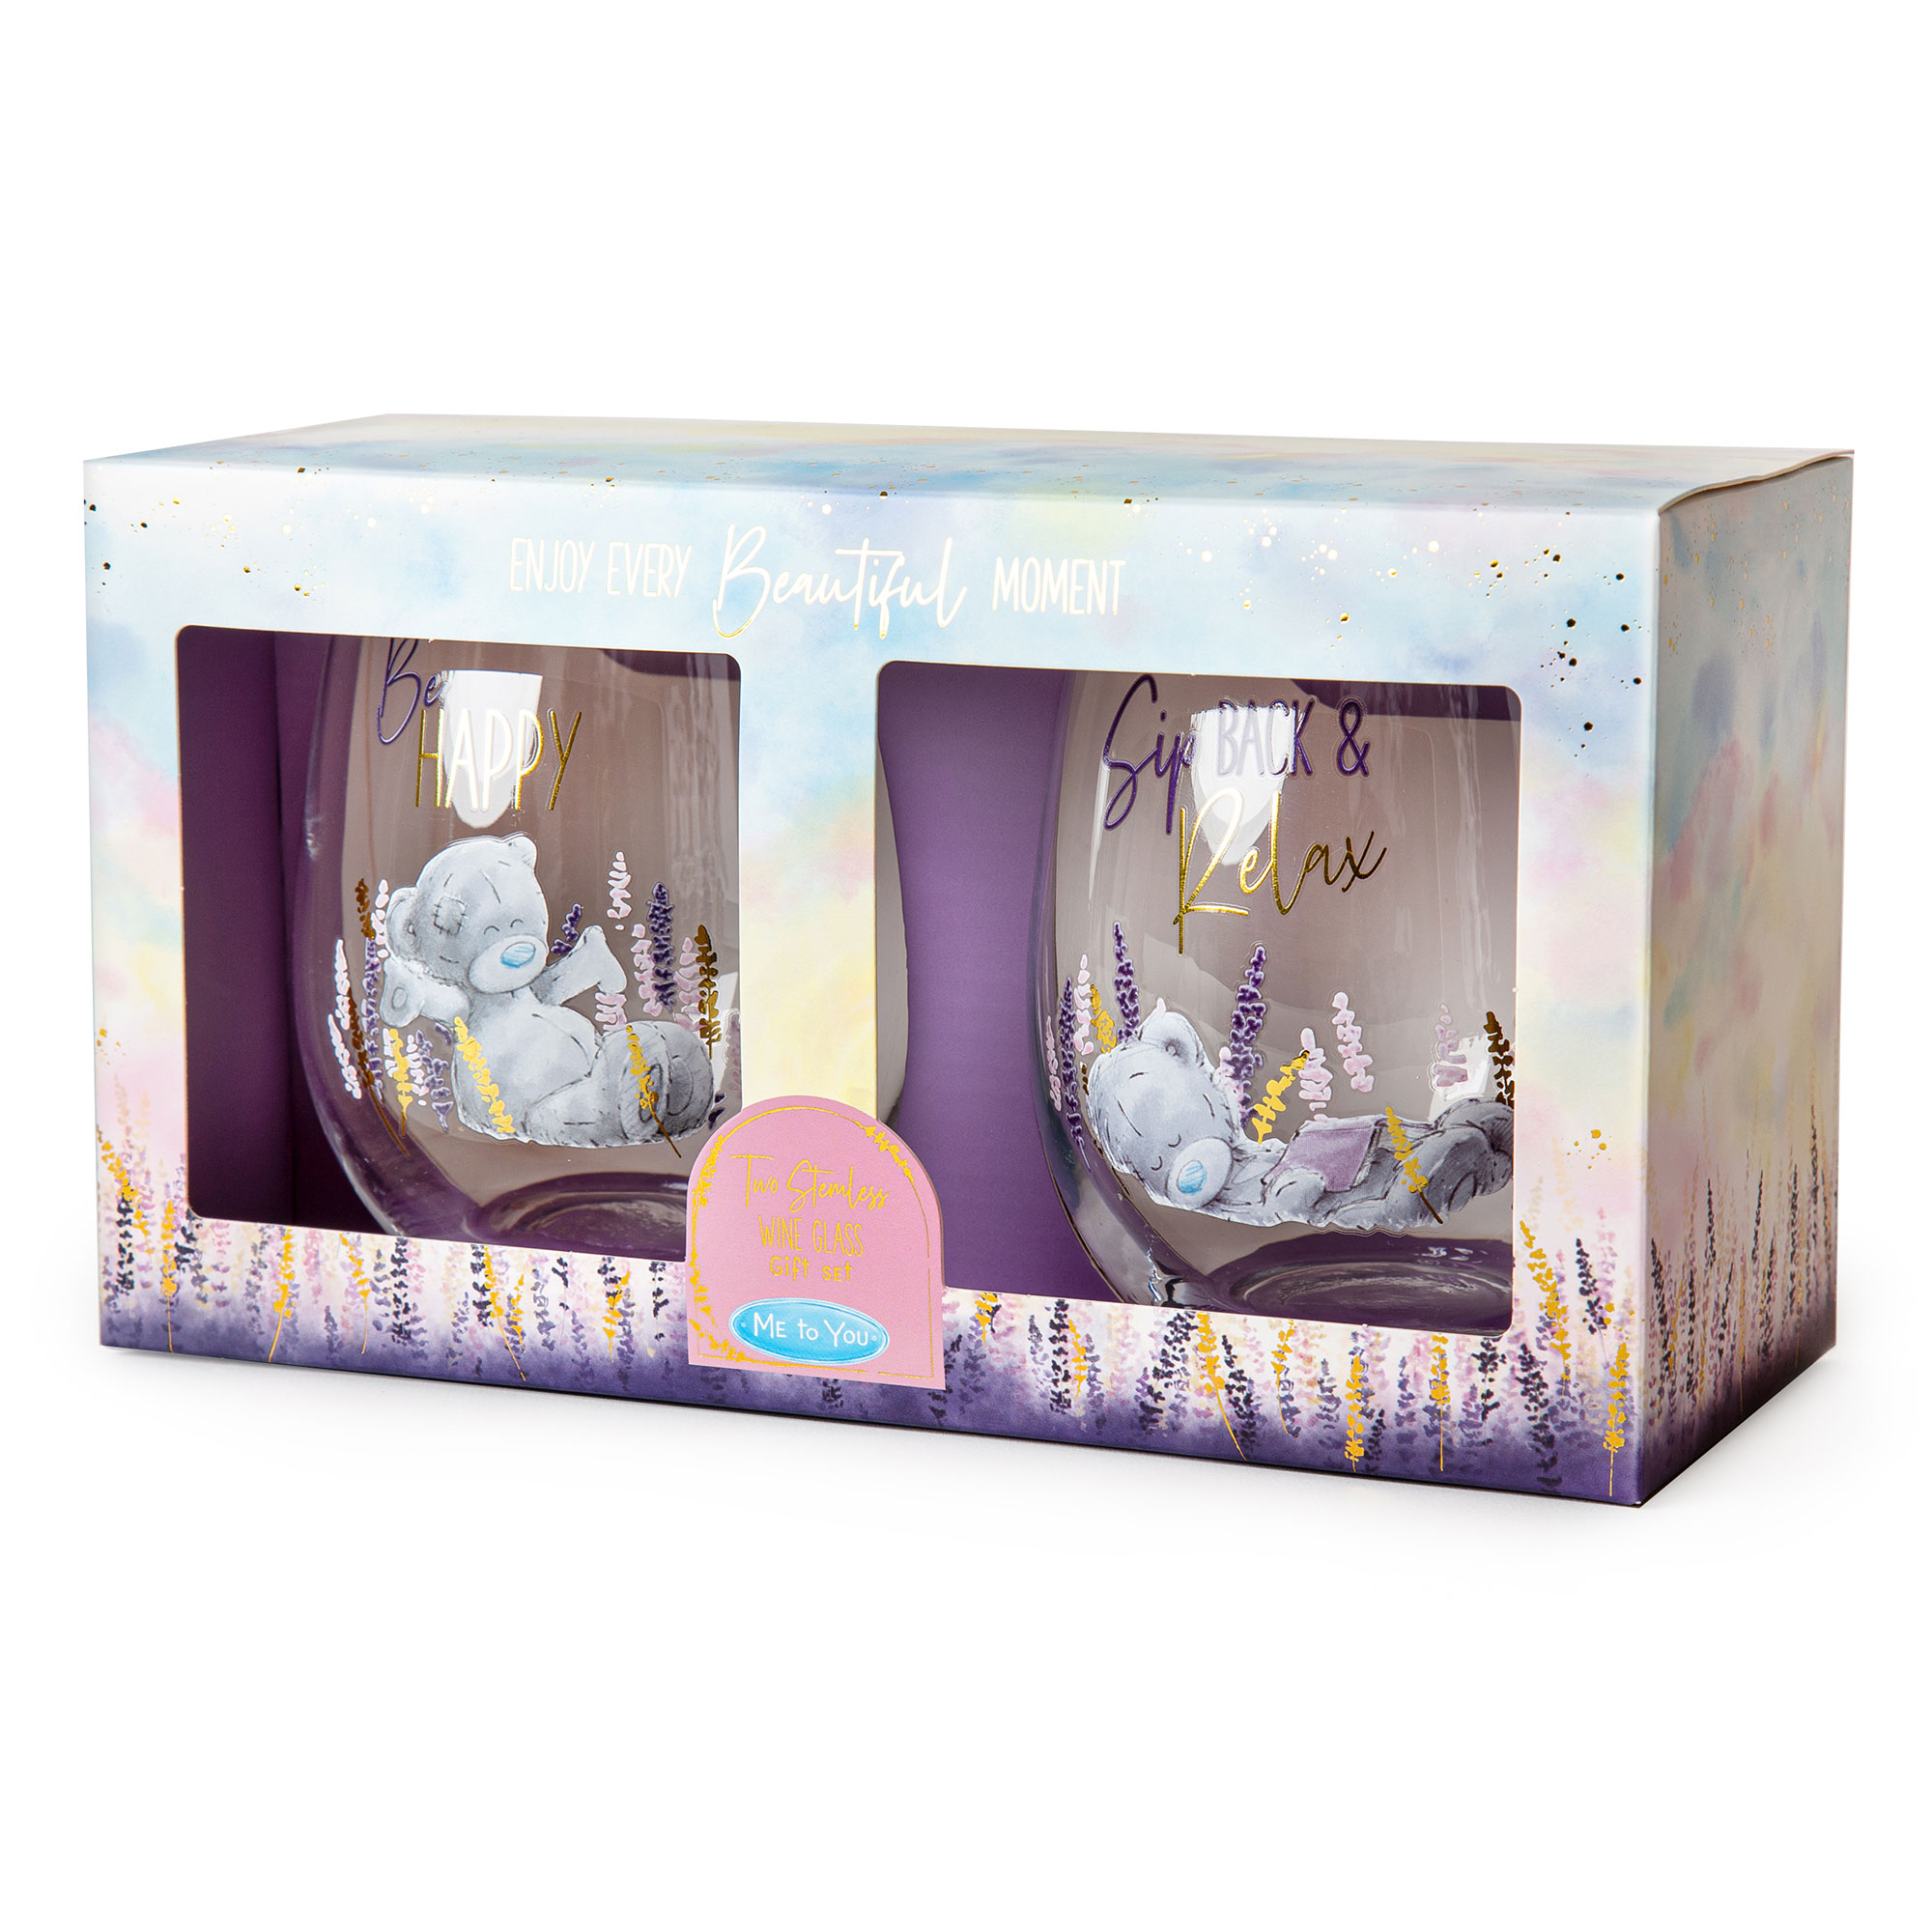 Me to You Tatty Teddy Lavender Fields Glass Tumblers Gift Set